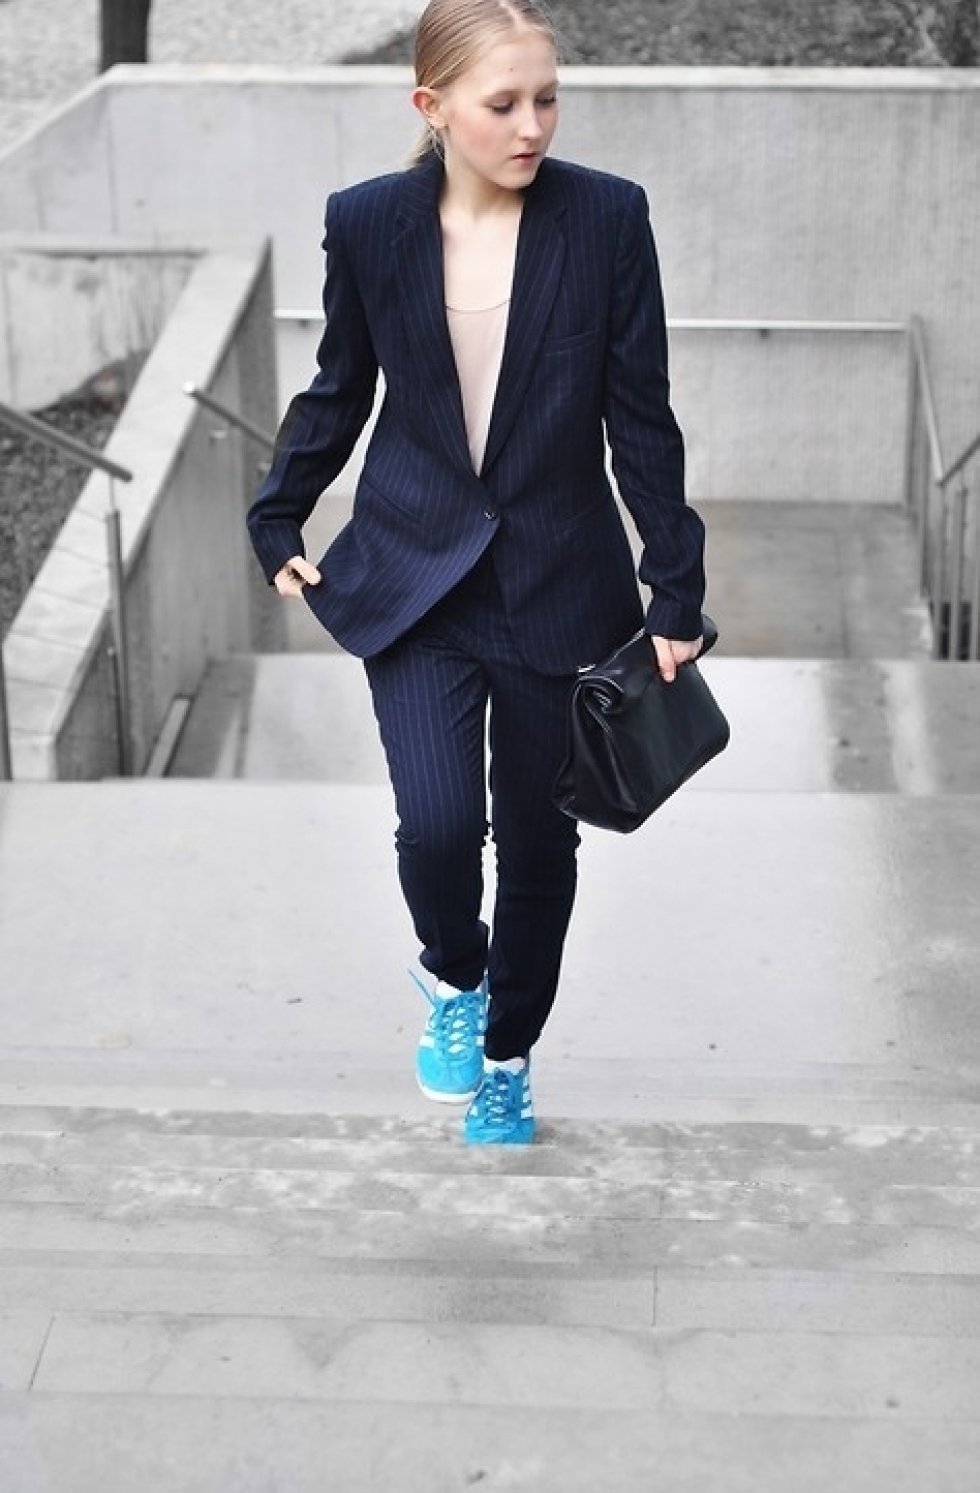 Foto: http://lookbook.nu/look/4743029-Mango-Suit-Adidas-Shoes-Zara-Bag-Striped-Suit-Movesfashion - Tendens 2013: Det androgyne look